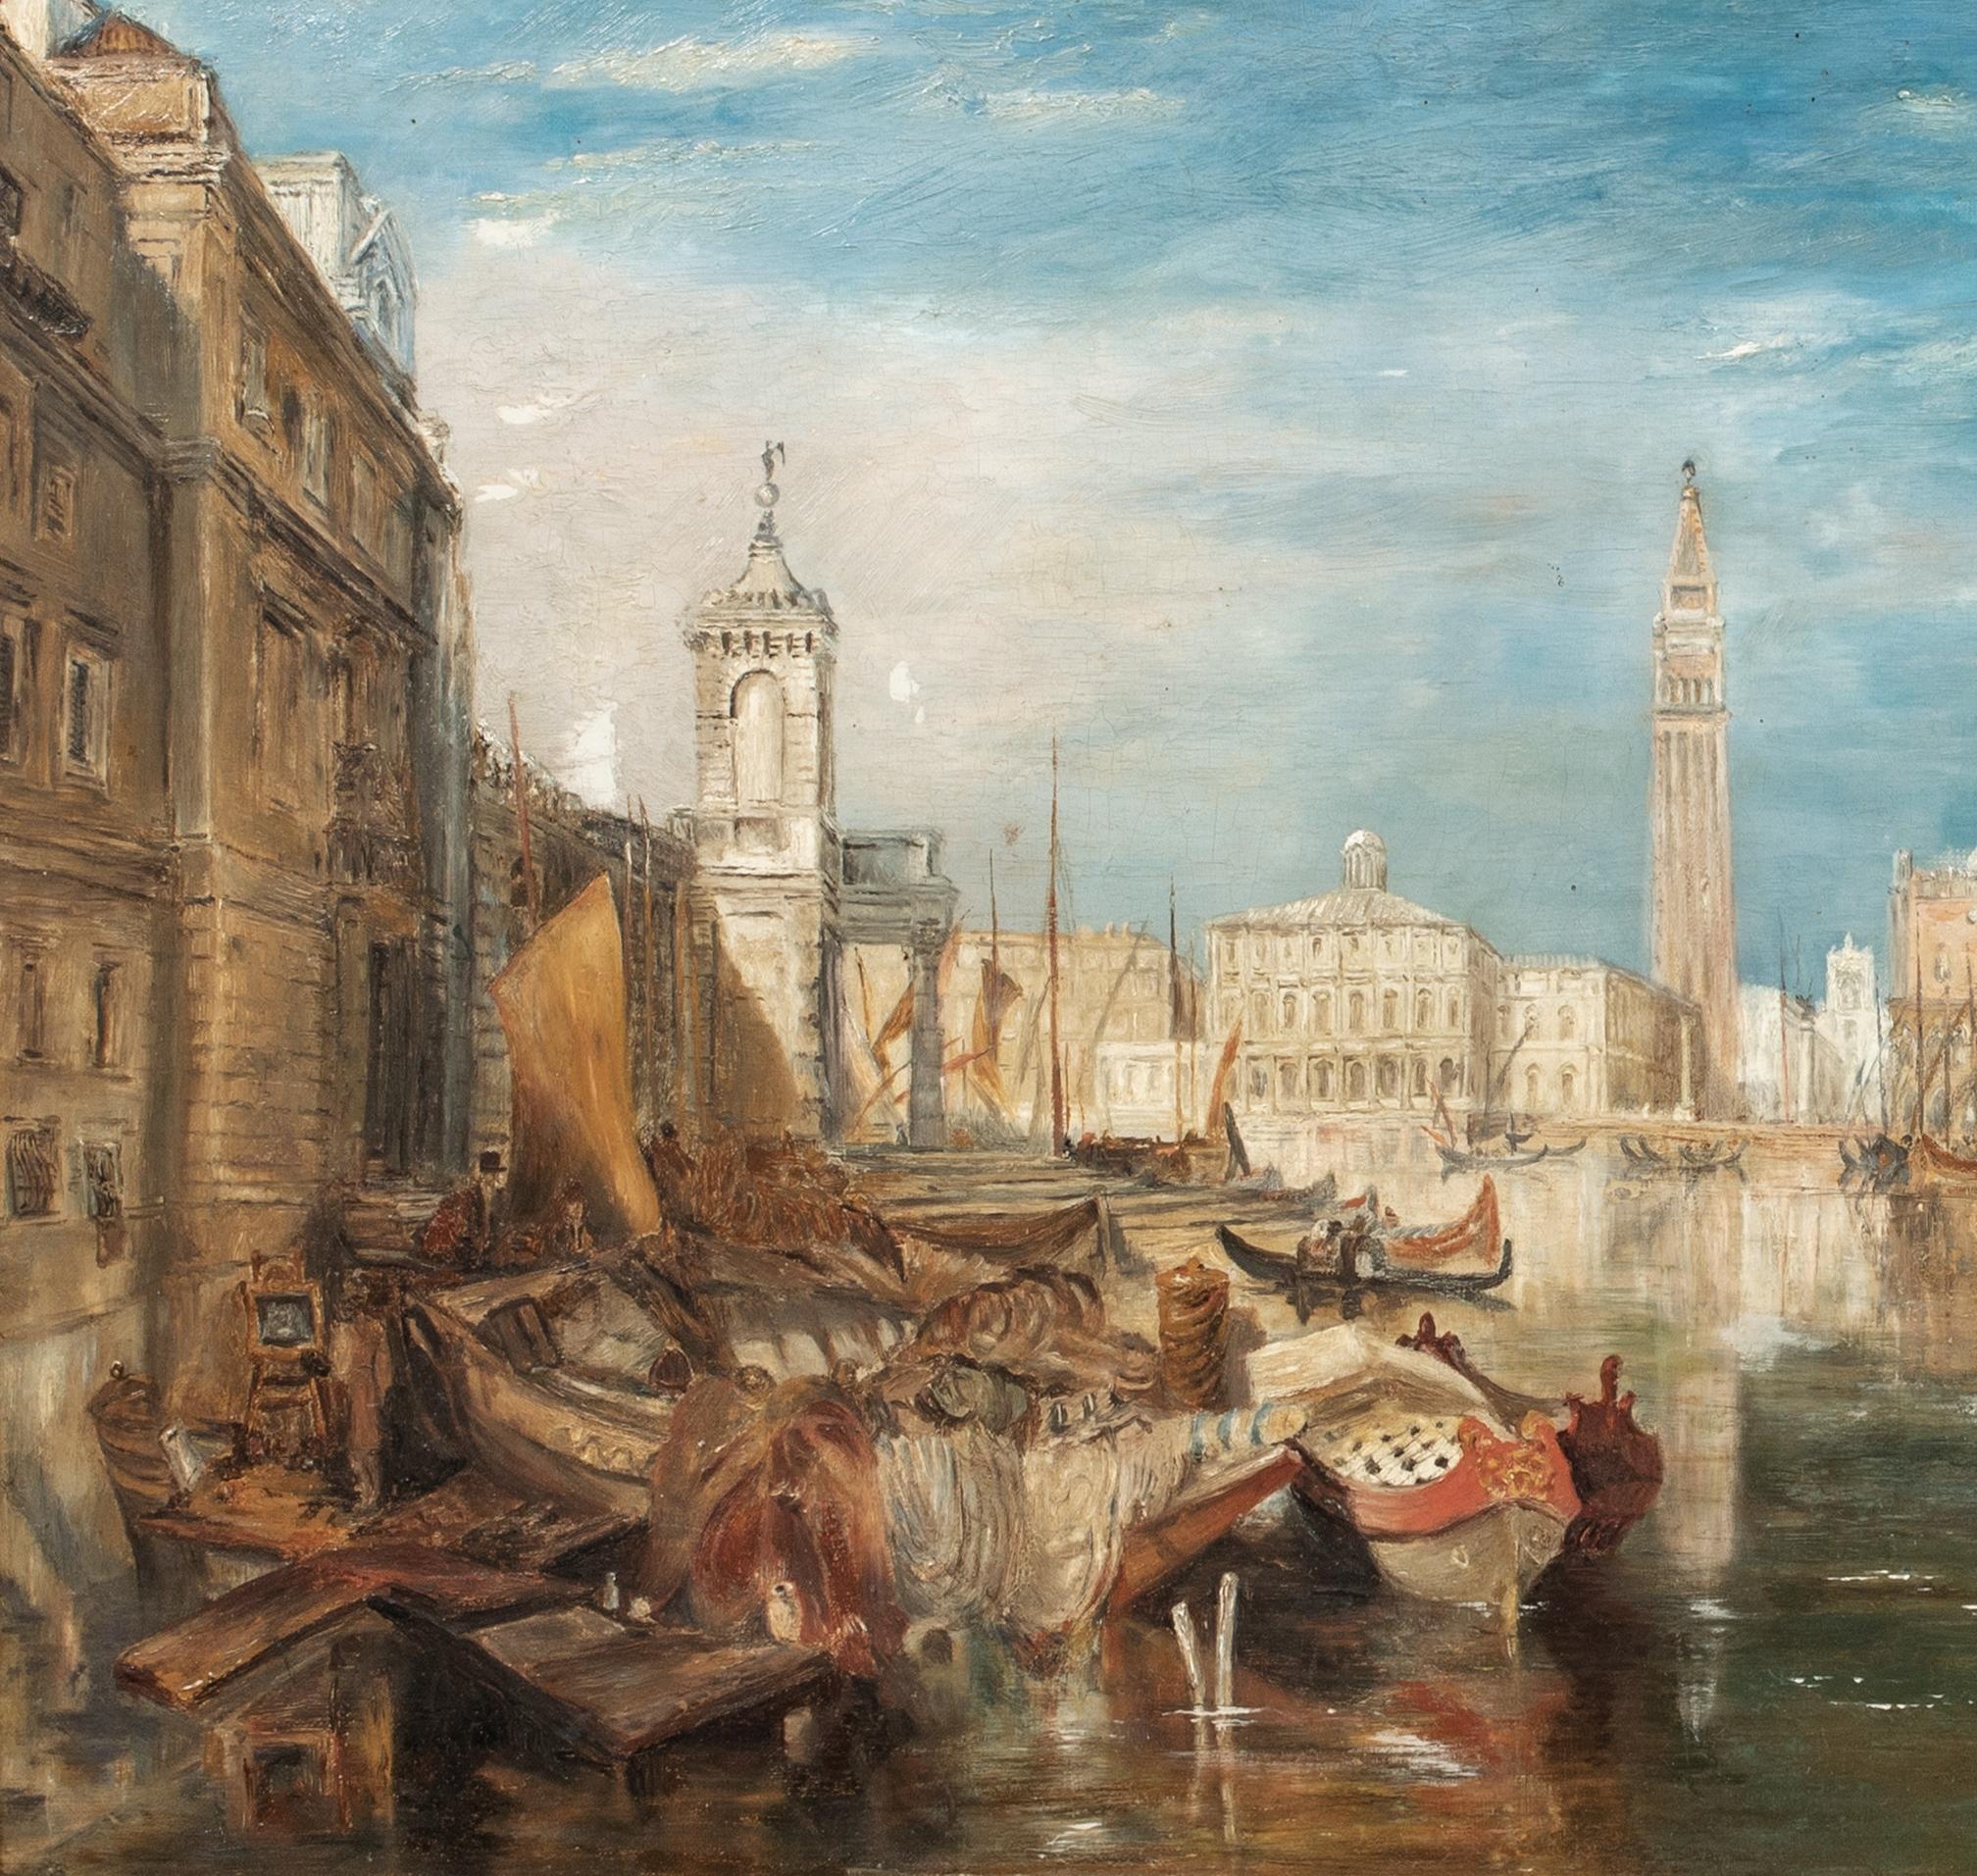 View Of Venice, 19th Century  School of Joseph Mallord William Turner  - Gray Portrait Painting by J.M.W. Turner